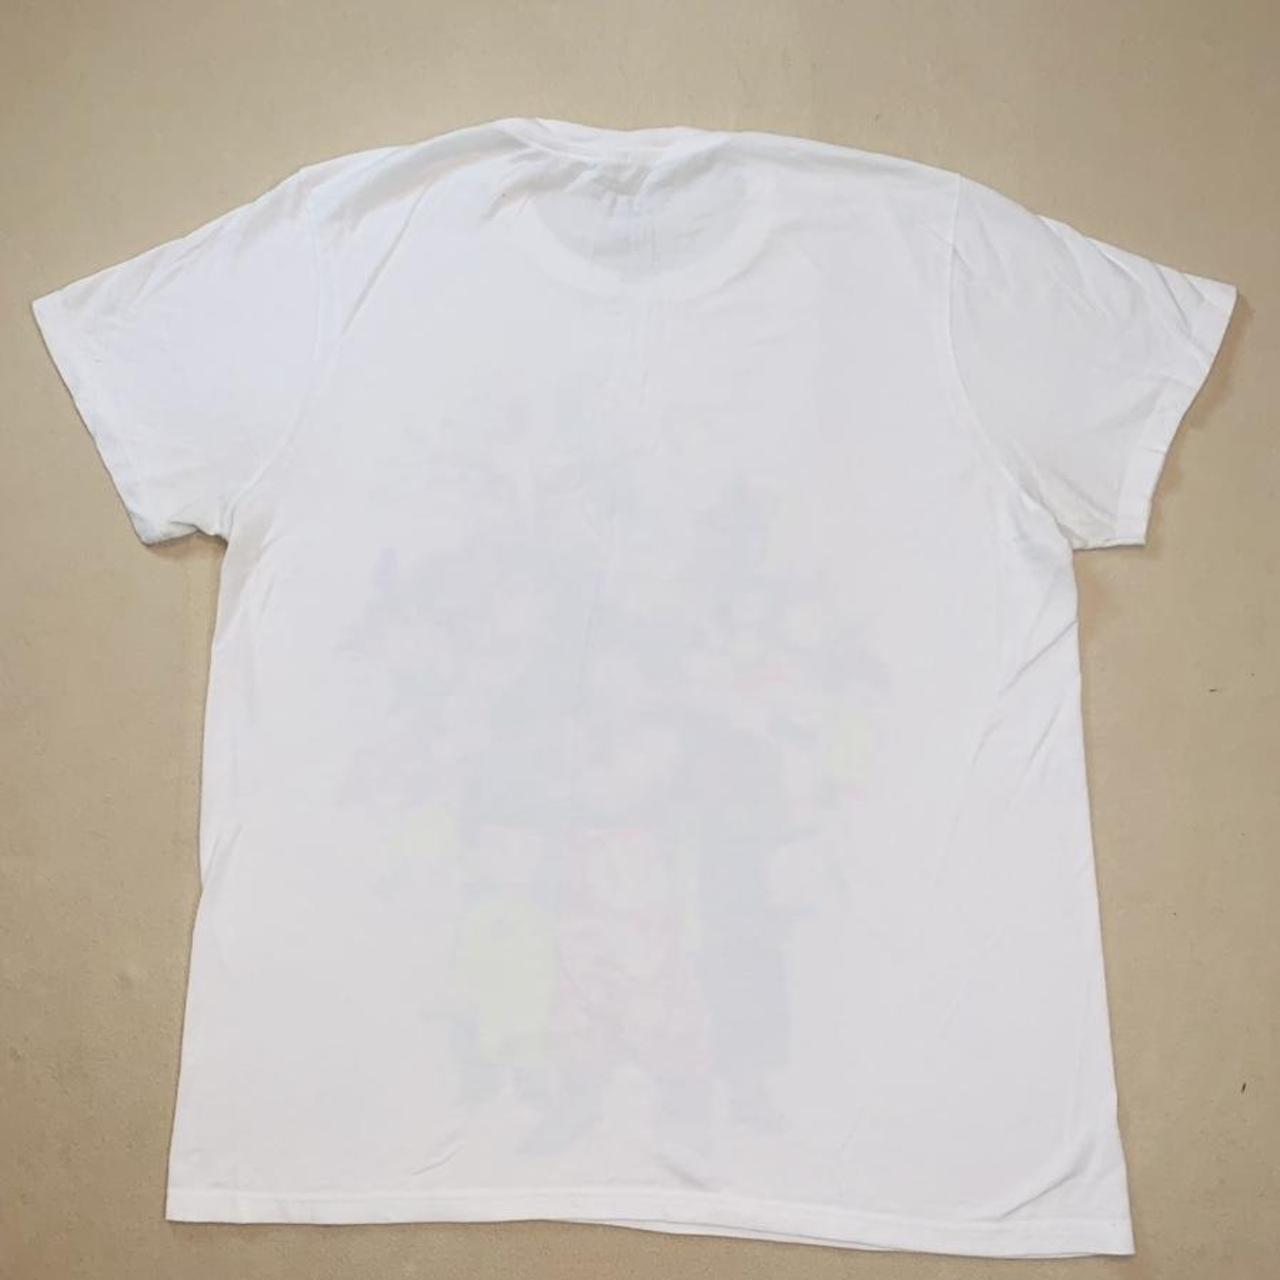 Product Image 4 - Dragon Ball Z graphic T-shirt